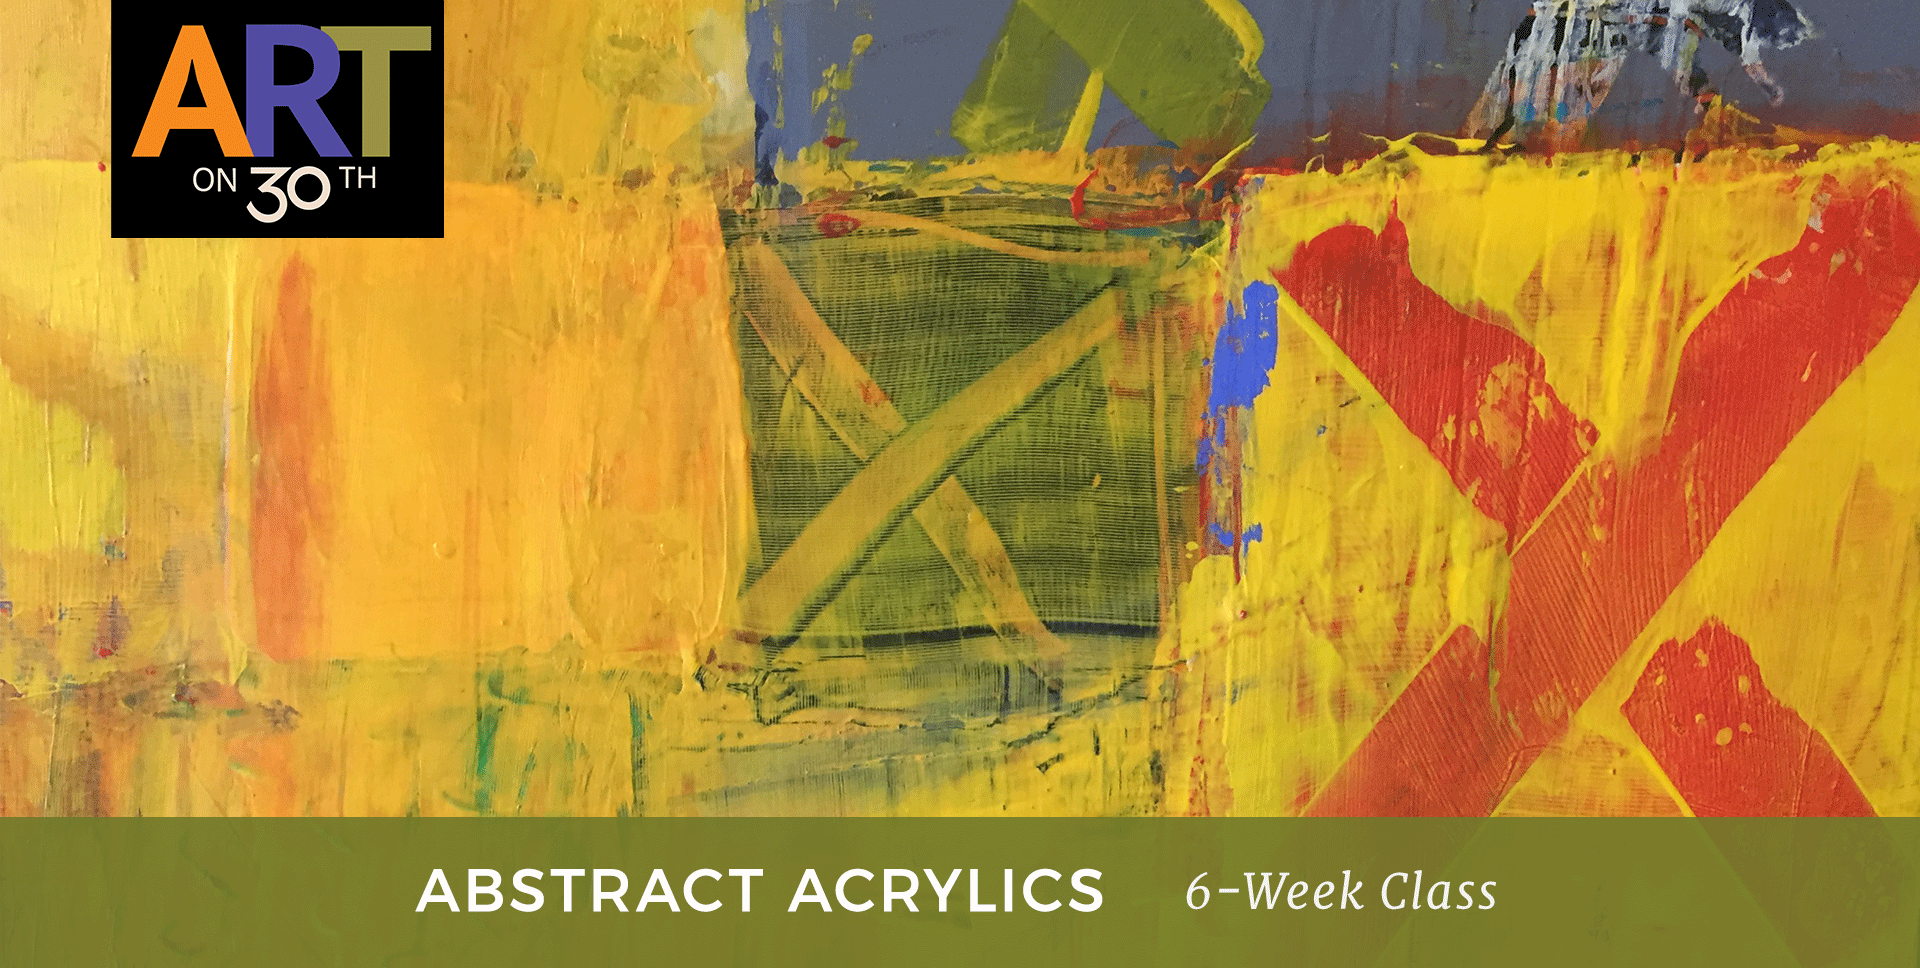 WED - Intro to Abstract Acrylic Painting with Kristen Ide